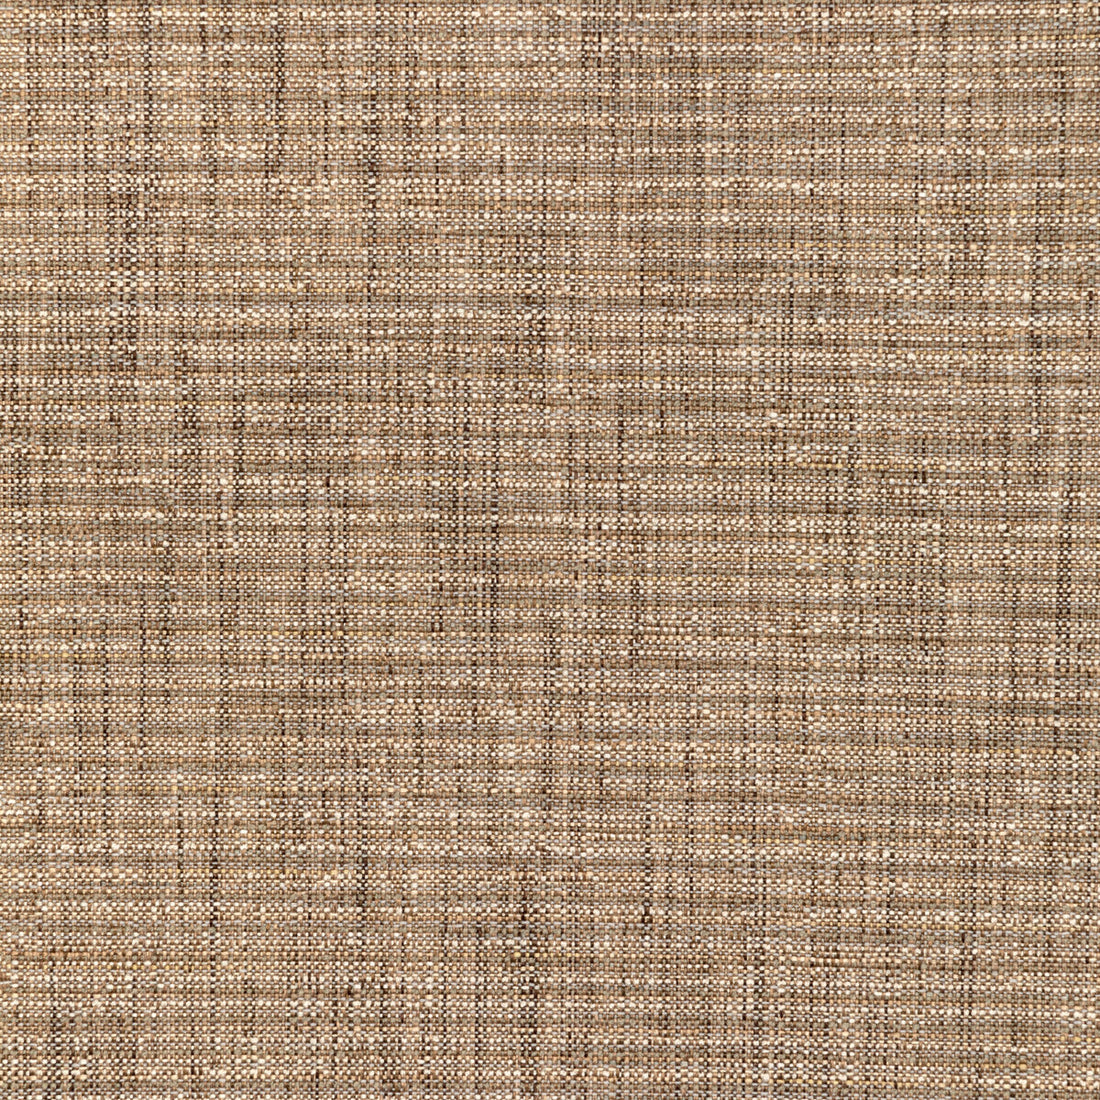 Kravet Smart fabric in 36289-16 color - pattern 36289.16.0 - by Kravet Smart in the Performance Crypton Home collection